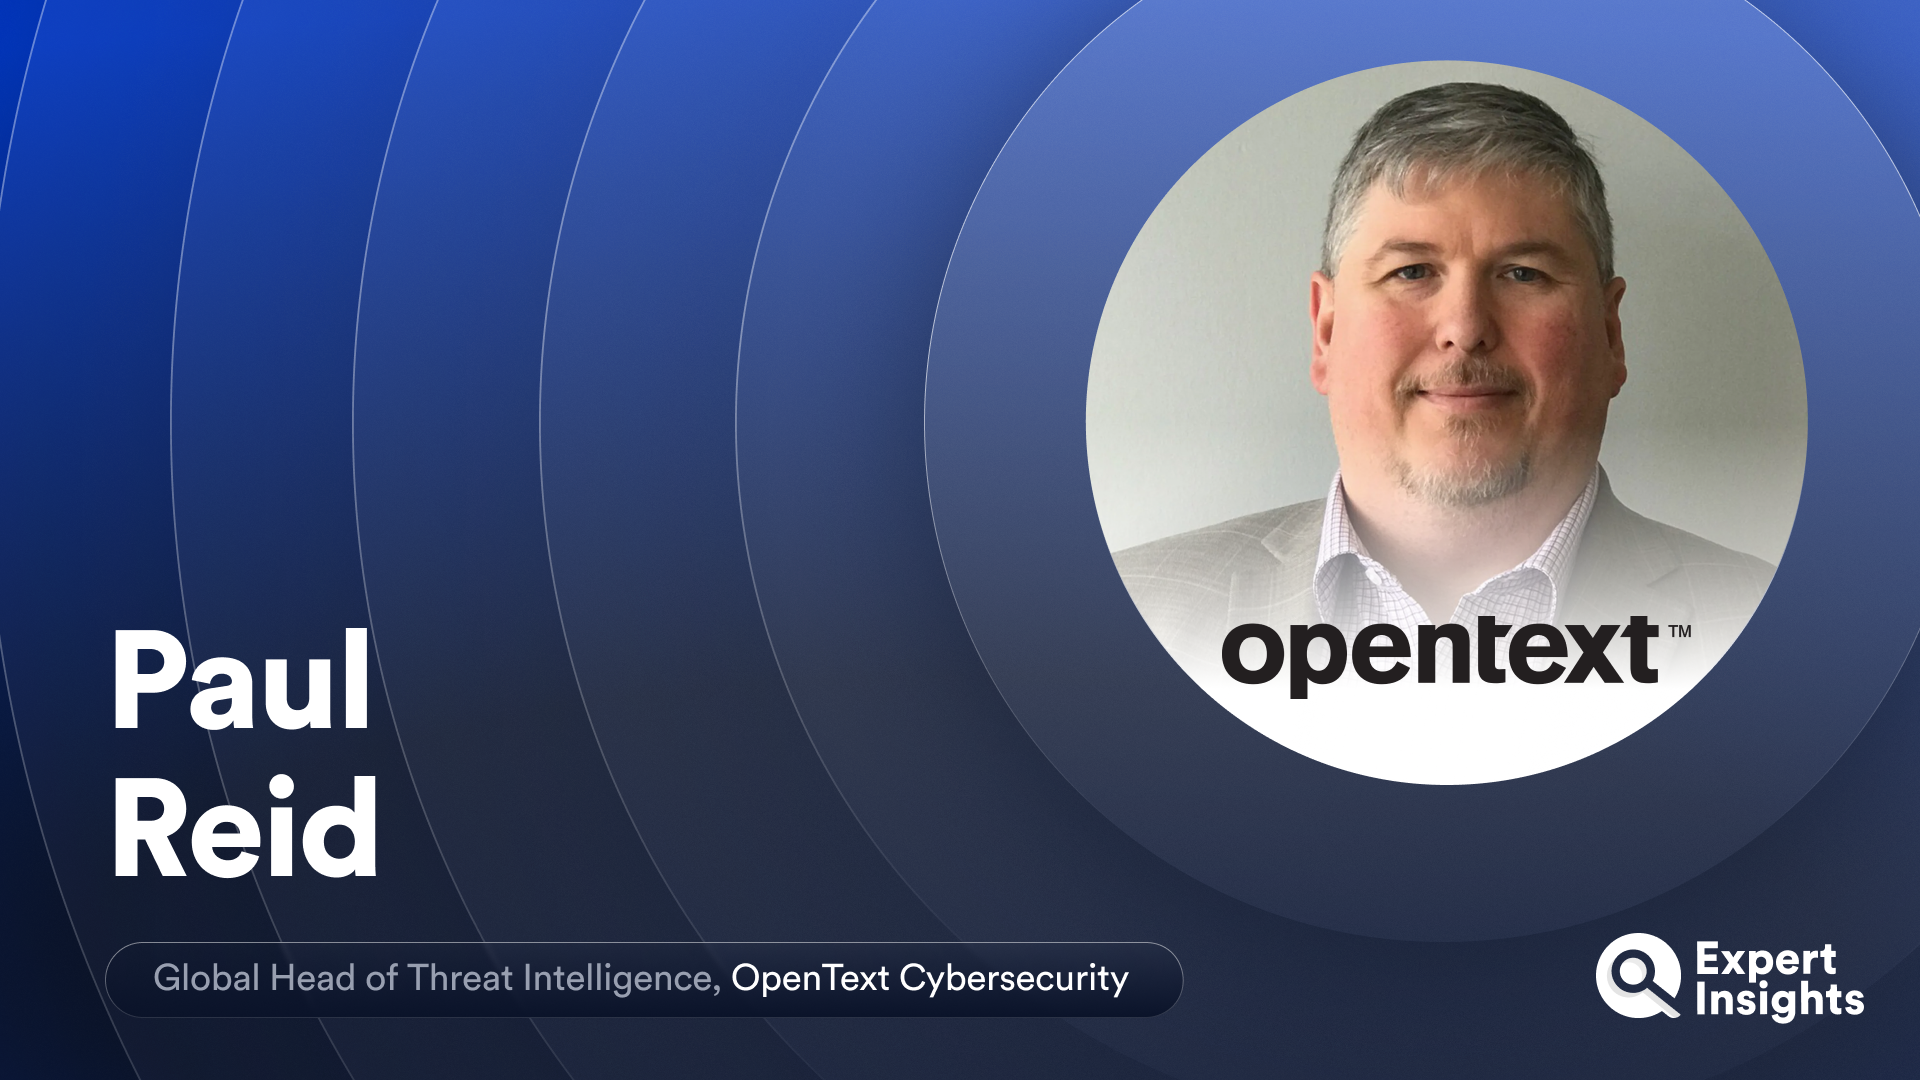 Expert Insights interview with Paul Reid of OpenText Cybersecurity